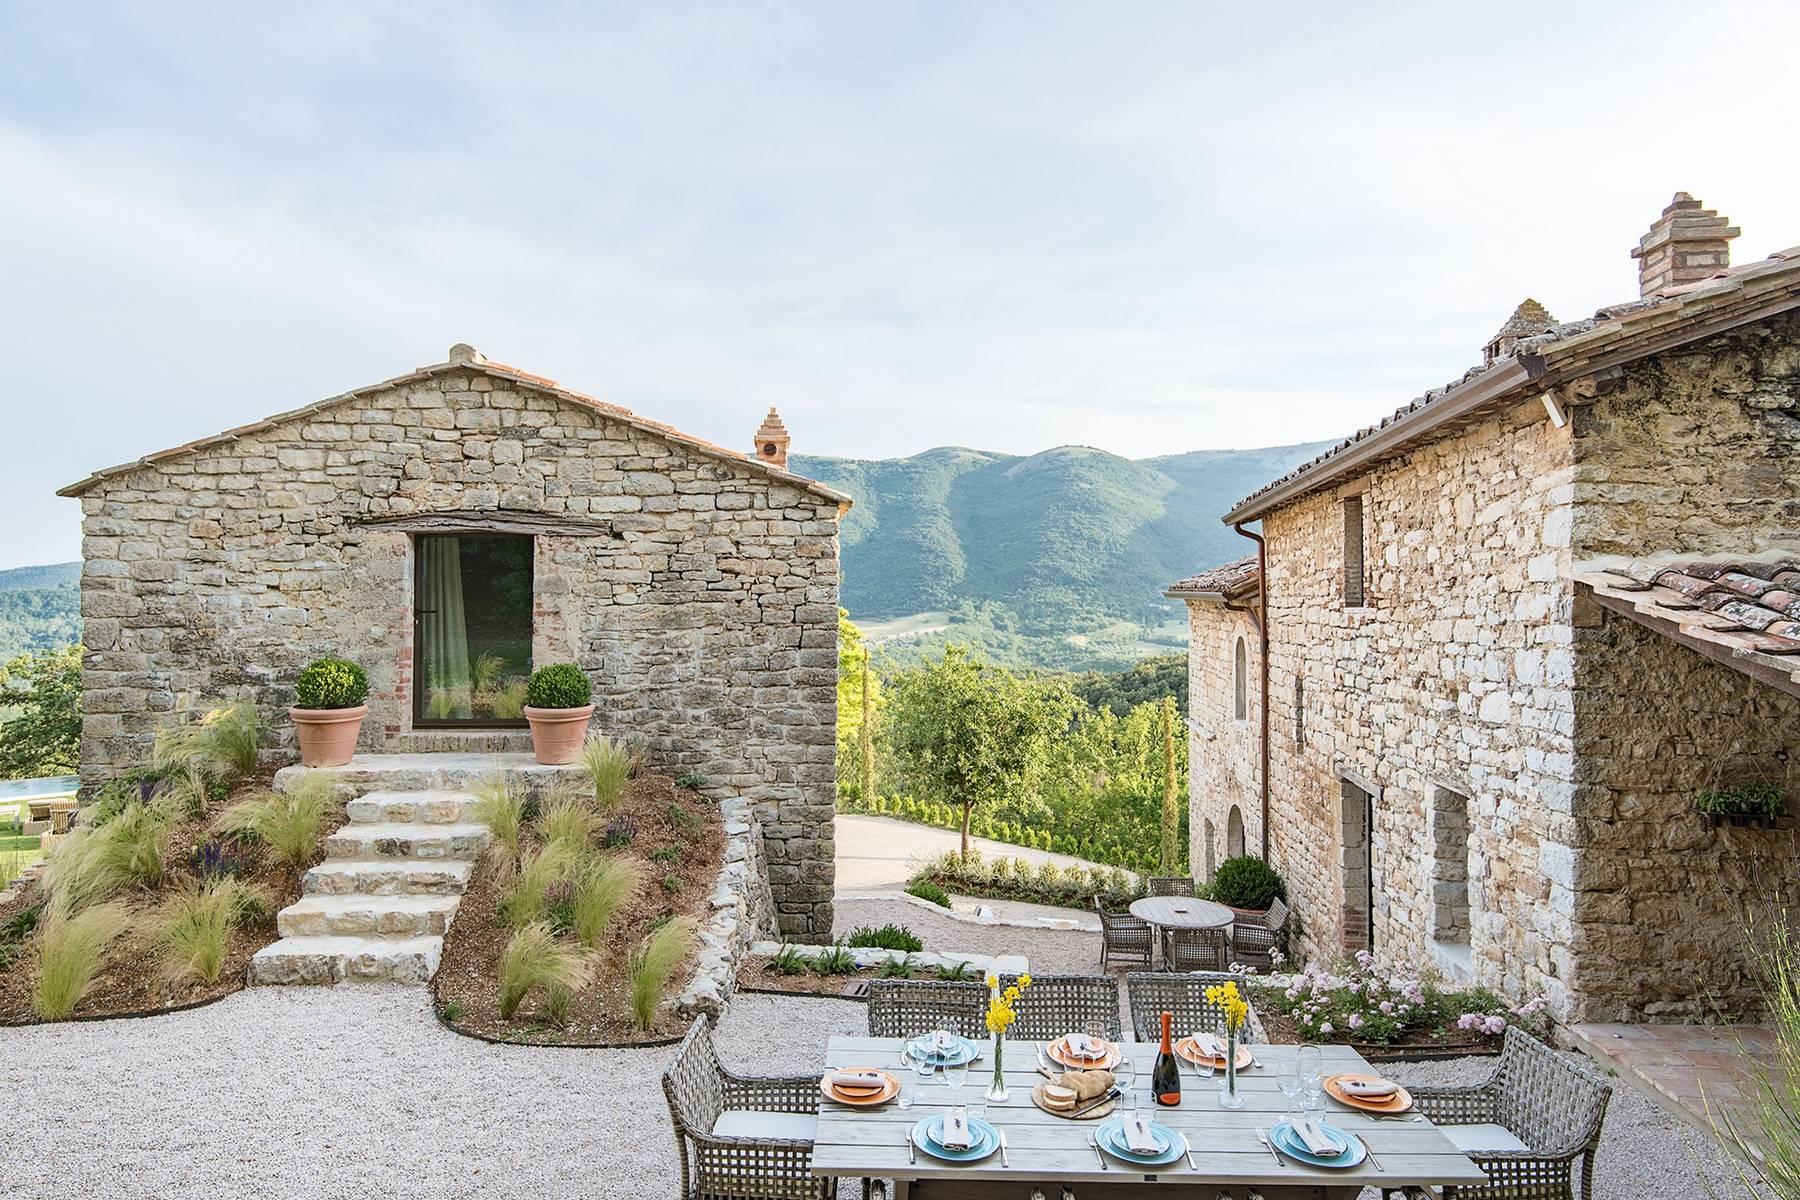 Complete privacy and luxury amidst the picturesque Umbrian countryside - 19